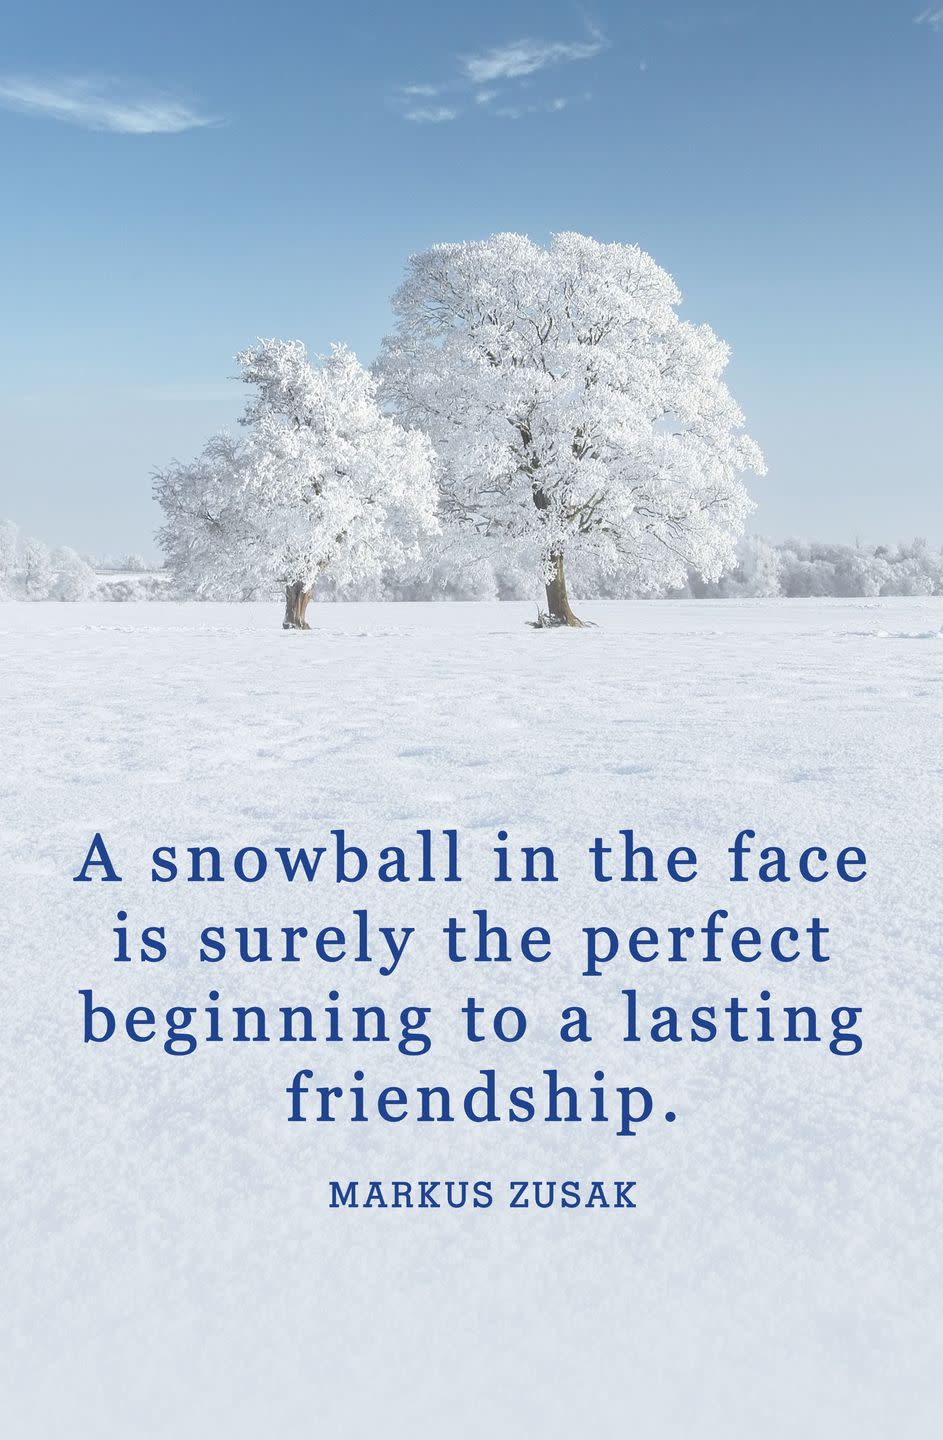 <p>"A snowball in the face is surely the perfect beginning to a lasting friendship."</p>